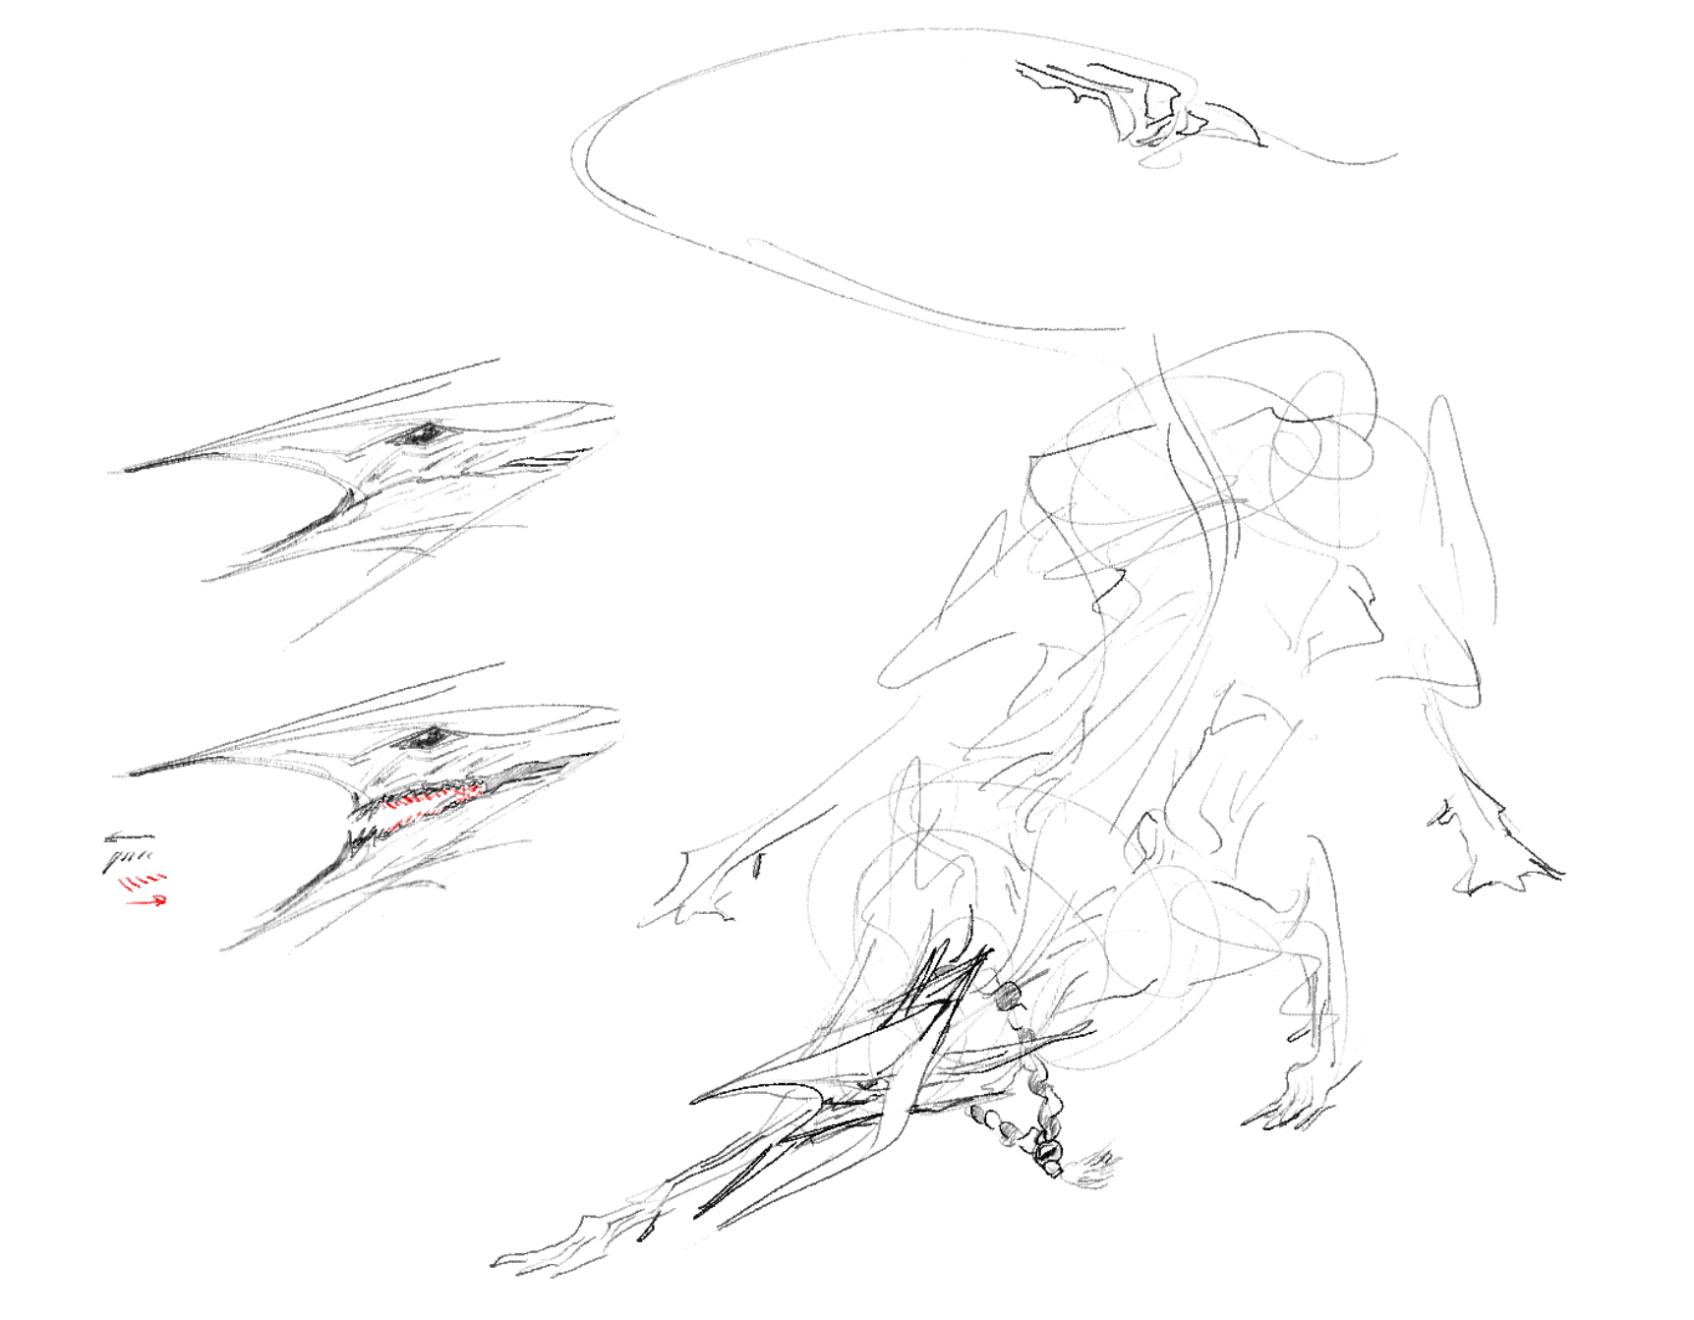 Omi early concepts